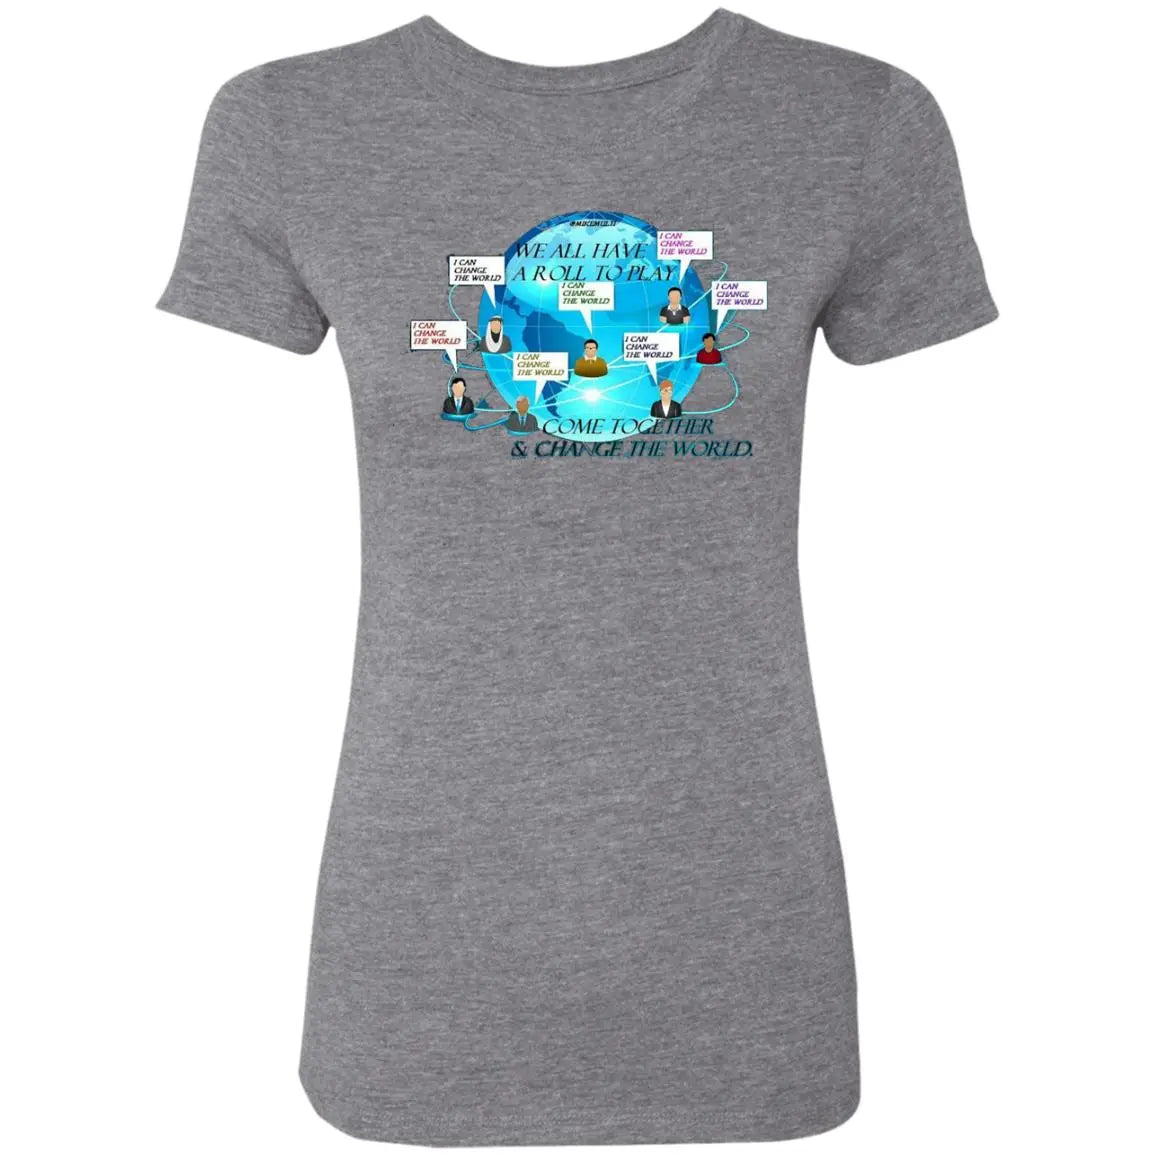 Come Together & Change The World Ladies Vintage T-Shirt Clothing – Multi Clothing Brand L L C®
multiclothingbrand.com/products/come-…
#clothingbrand #clothingline #clothingstore #clothingcompany #sustainable #affordable #premium #clothings #ethical #streetclothing #streetwear #multi